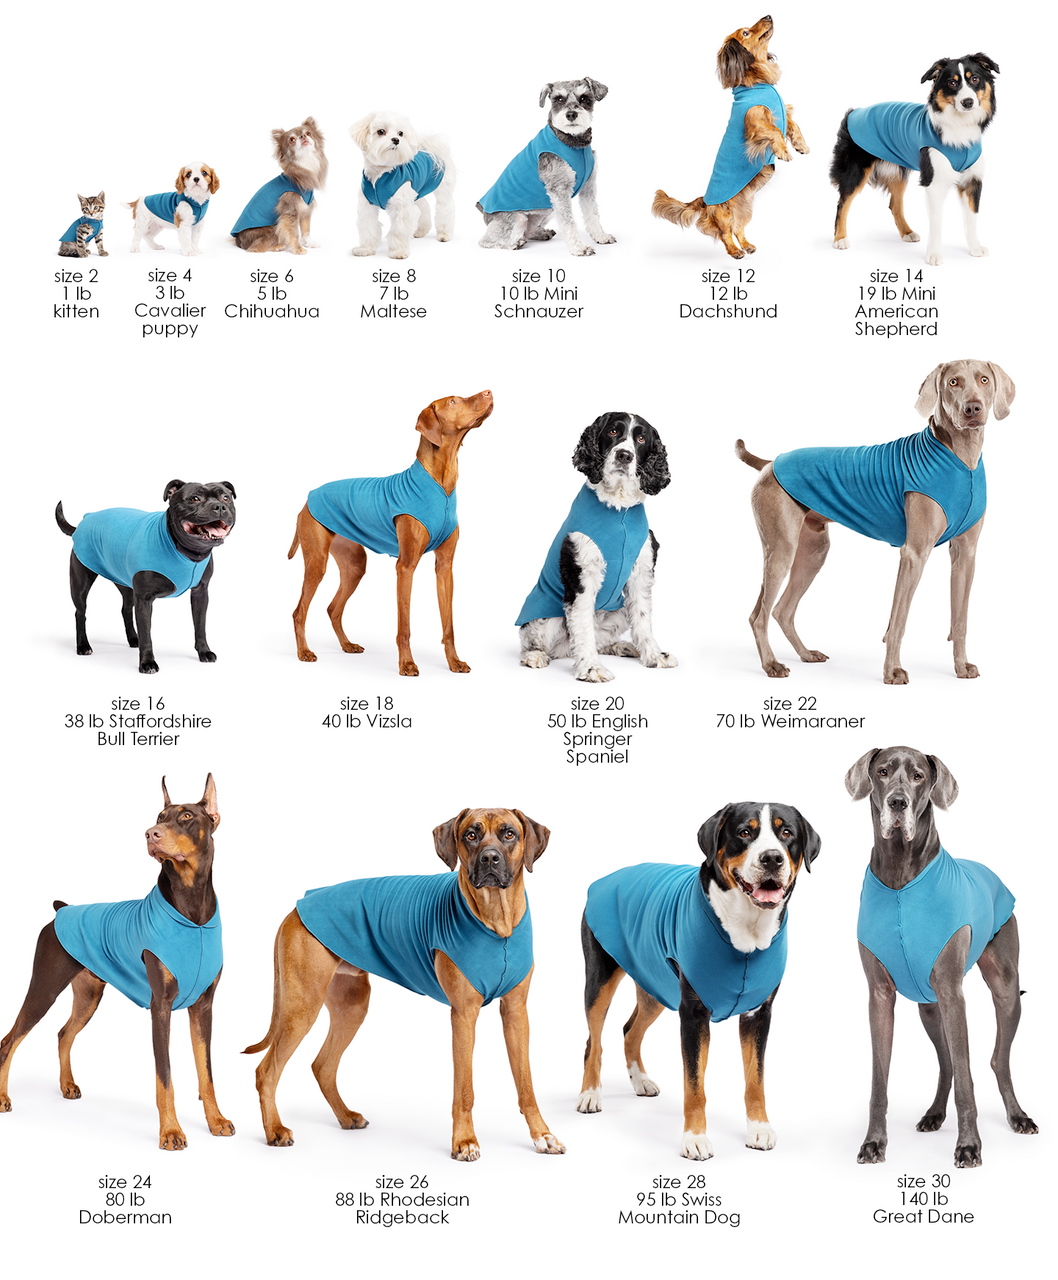 Sun Shield Tee shirts for Dogs and Cats, in Sand